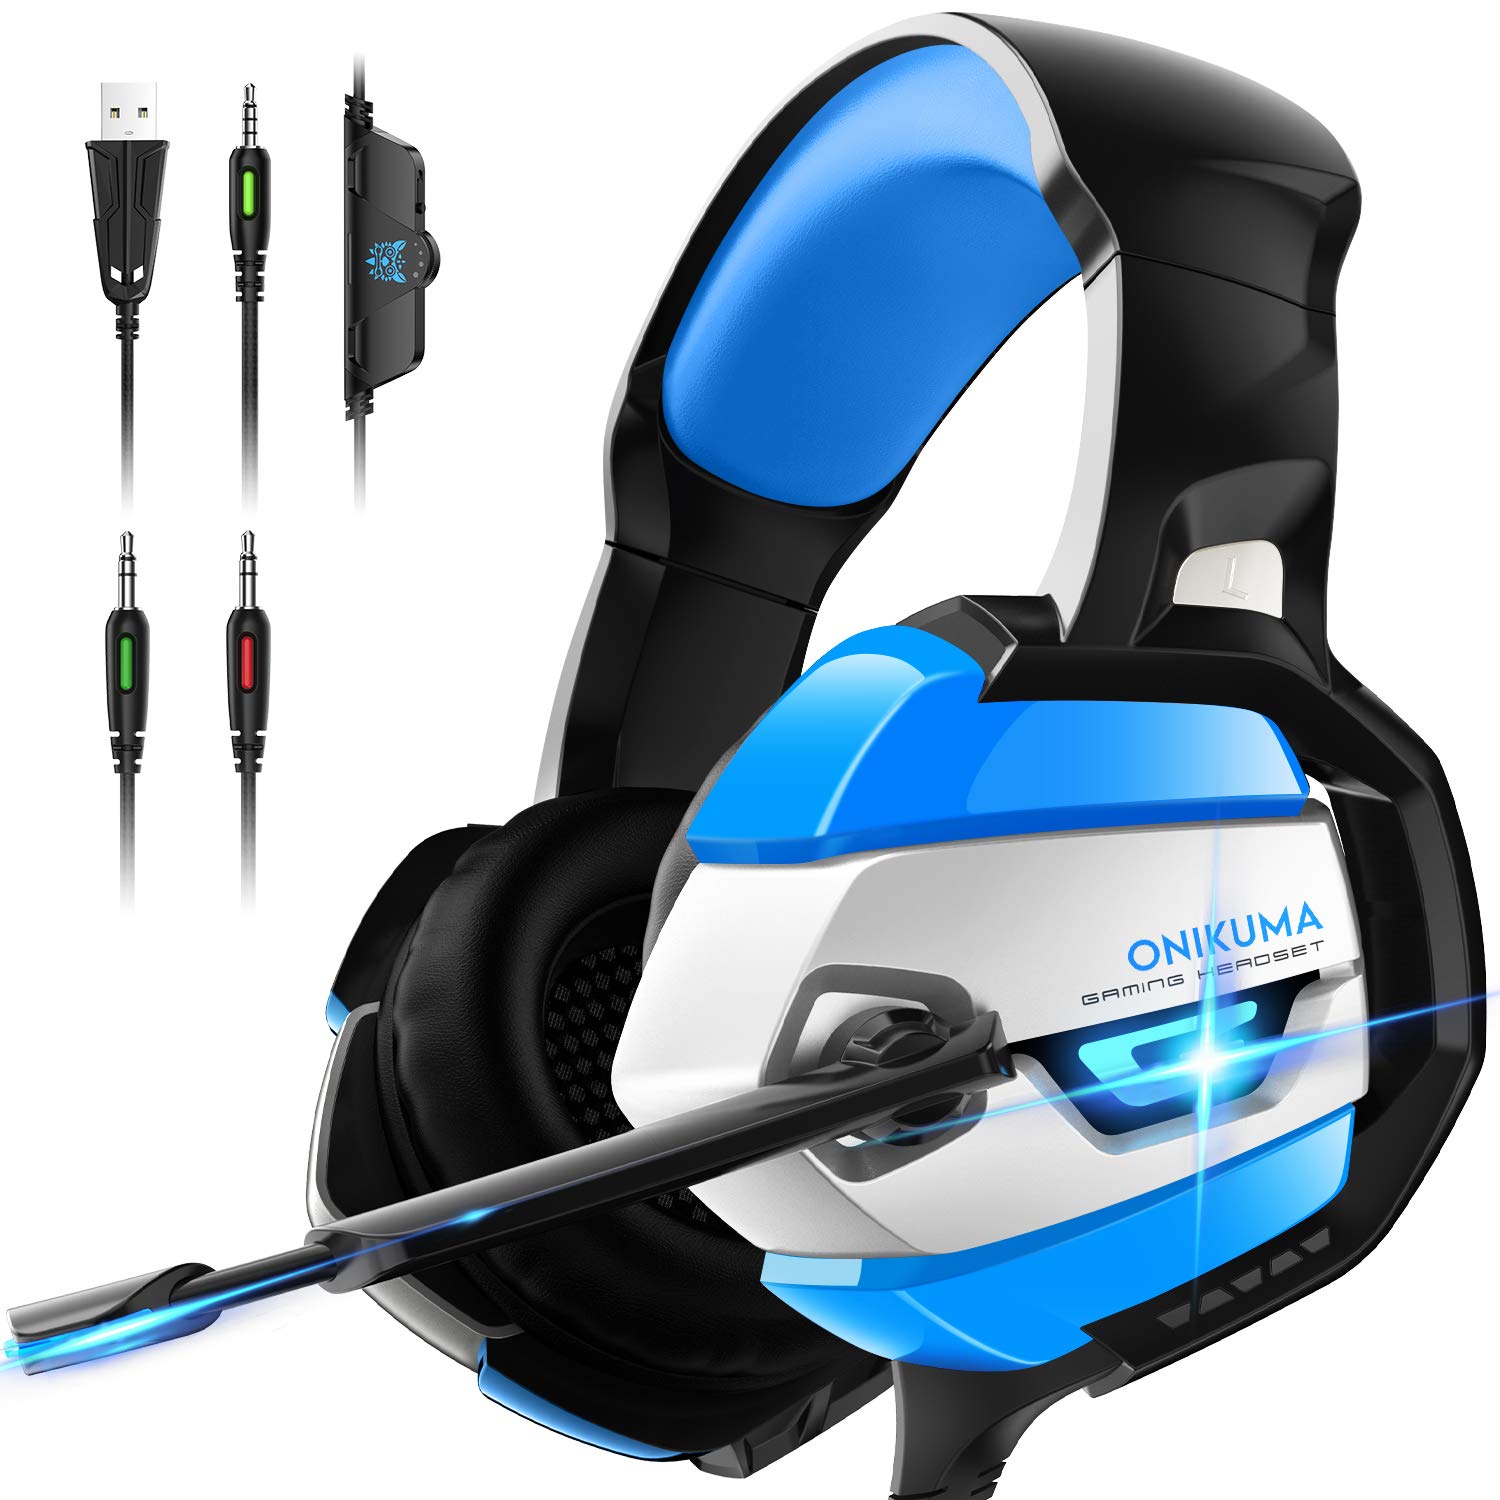 ONIKUMA Gaming Headset - Xbox One Headset PS4 Headset PC Headset with Noise Canceling Mic &7.1 Surround Bass, Gaming Headphones for PS4, Xbox One, PC,Gamecube ,Nintendo 64 (Adapter Not Included)